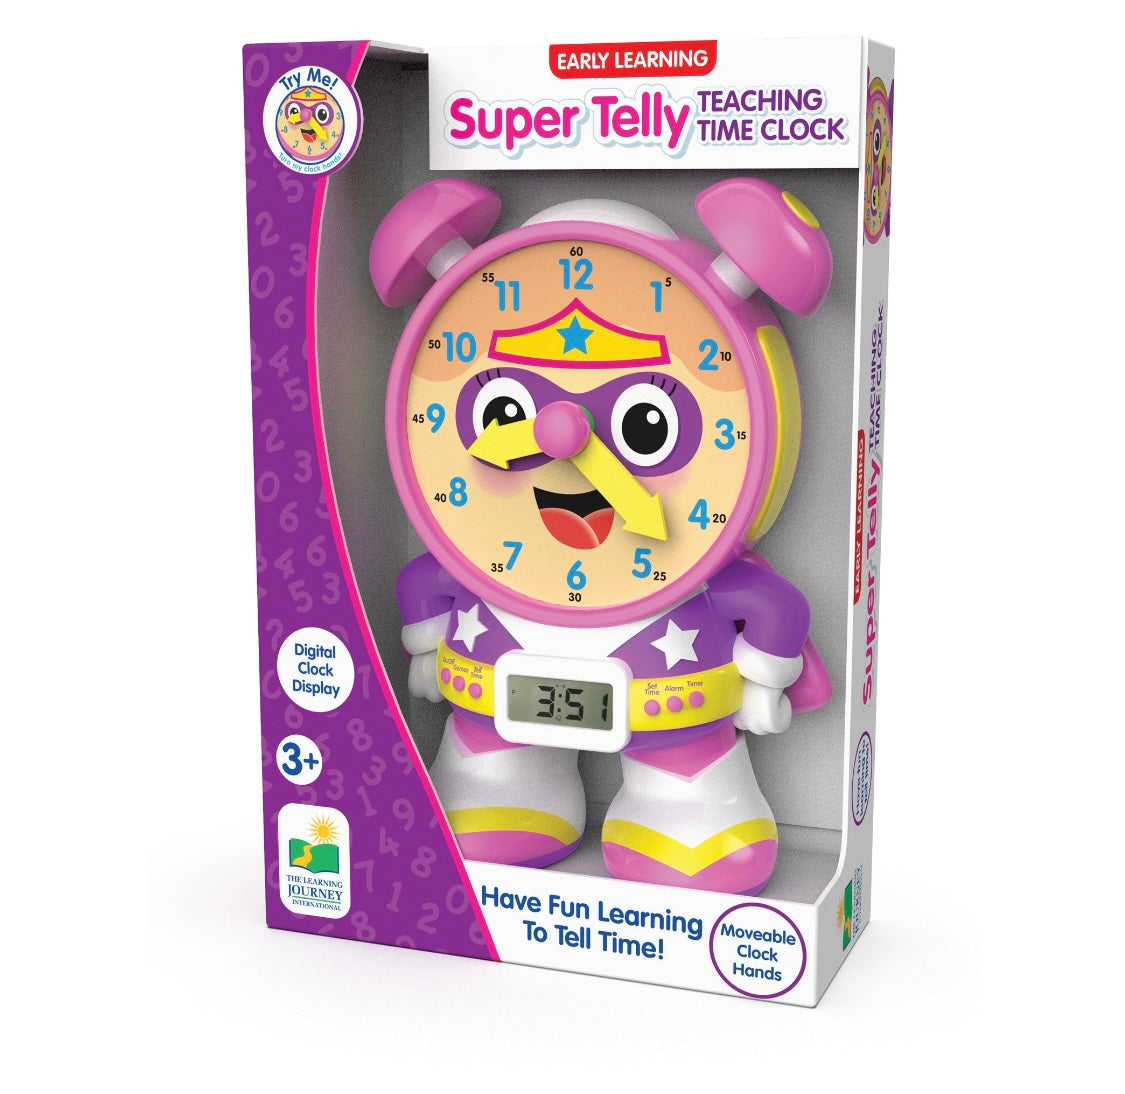 Super Telly Teaching time clock Pink